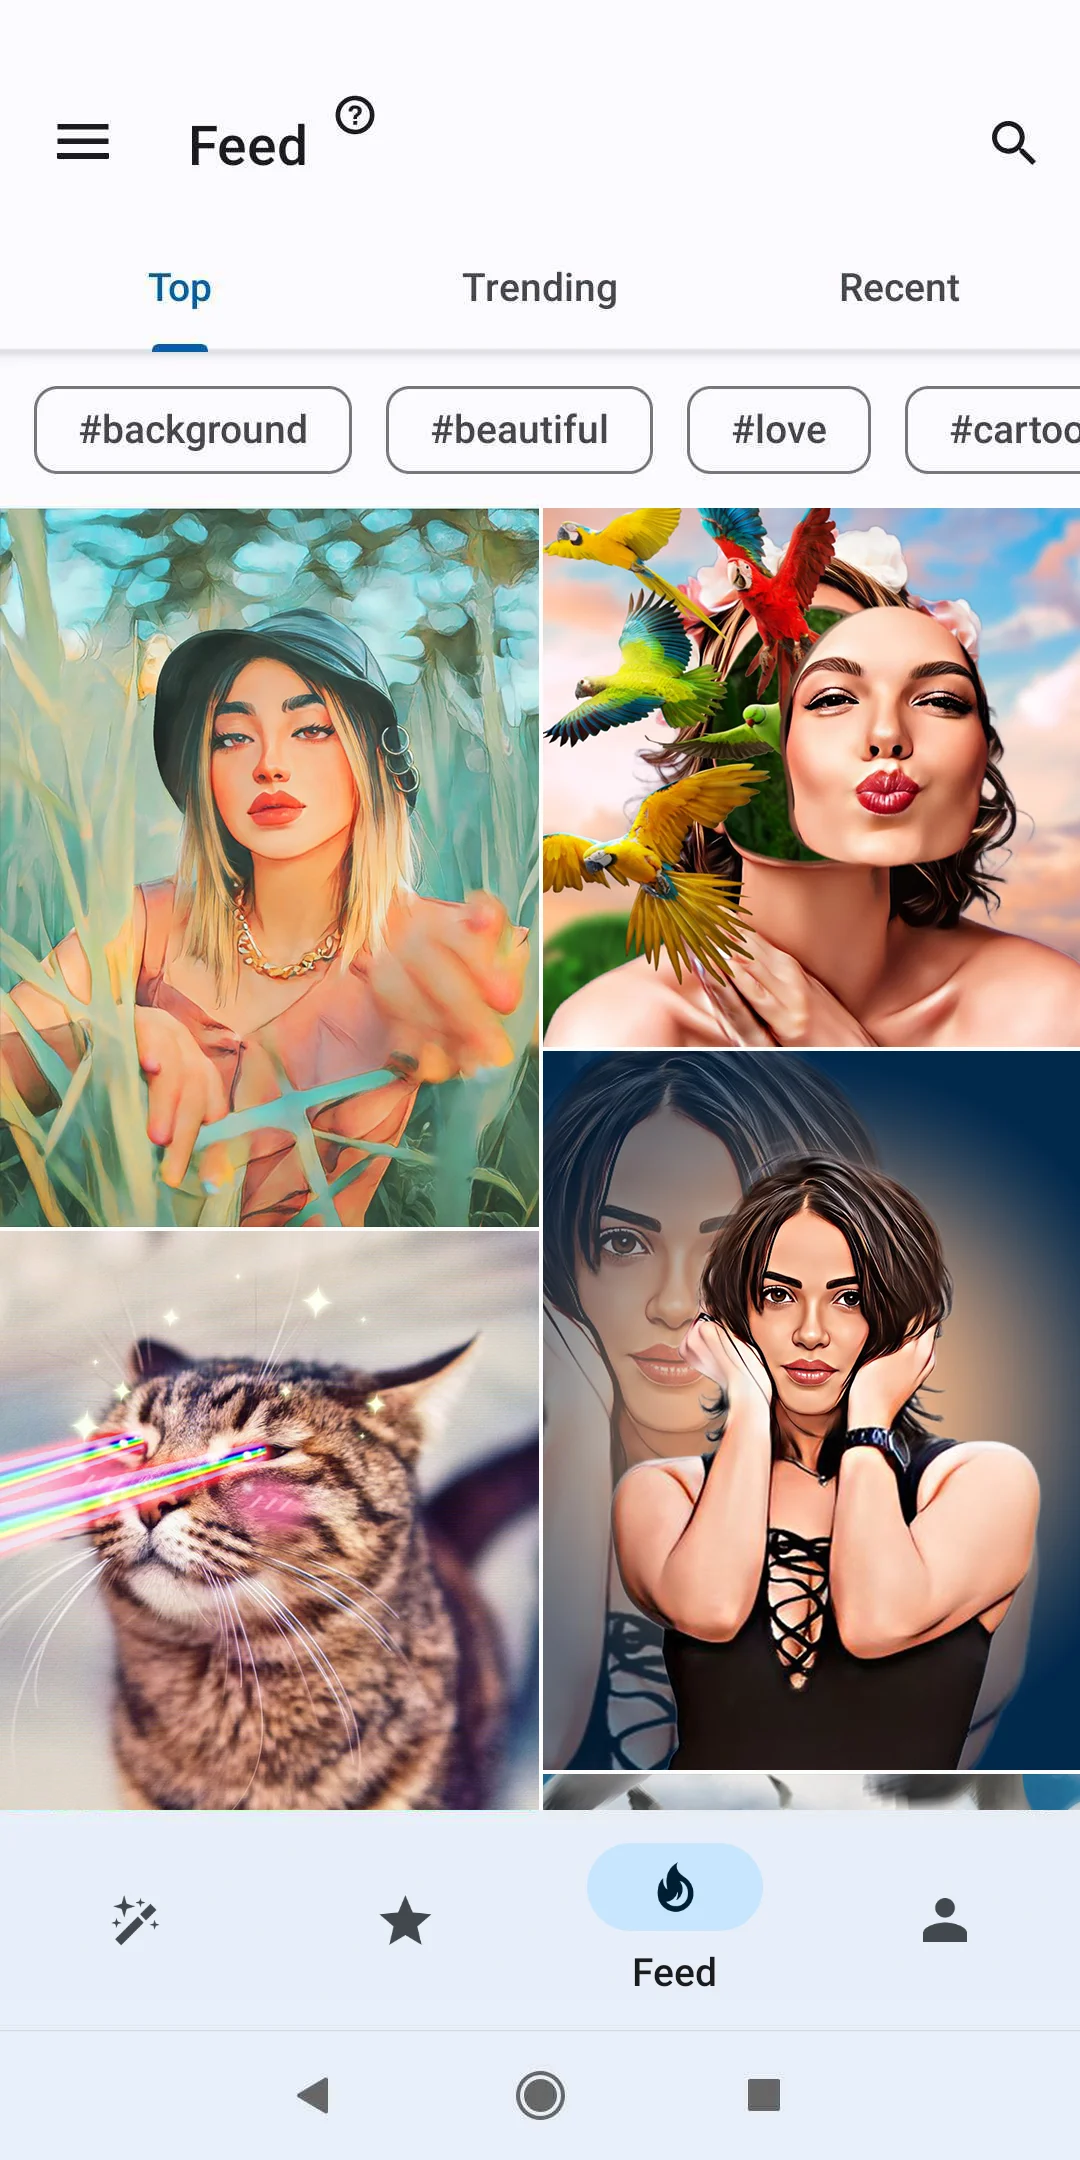 unnamed 16 10 - Photo Lab Mod Apk V3.13.2 (Without Watermark) Unlocked